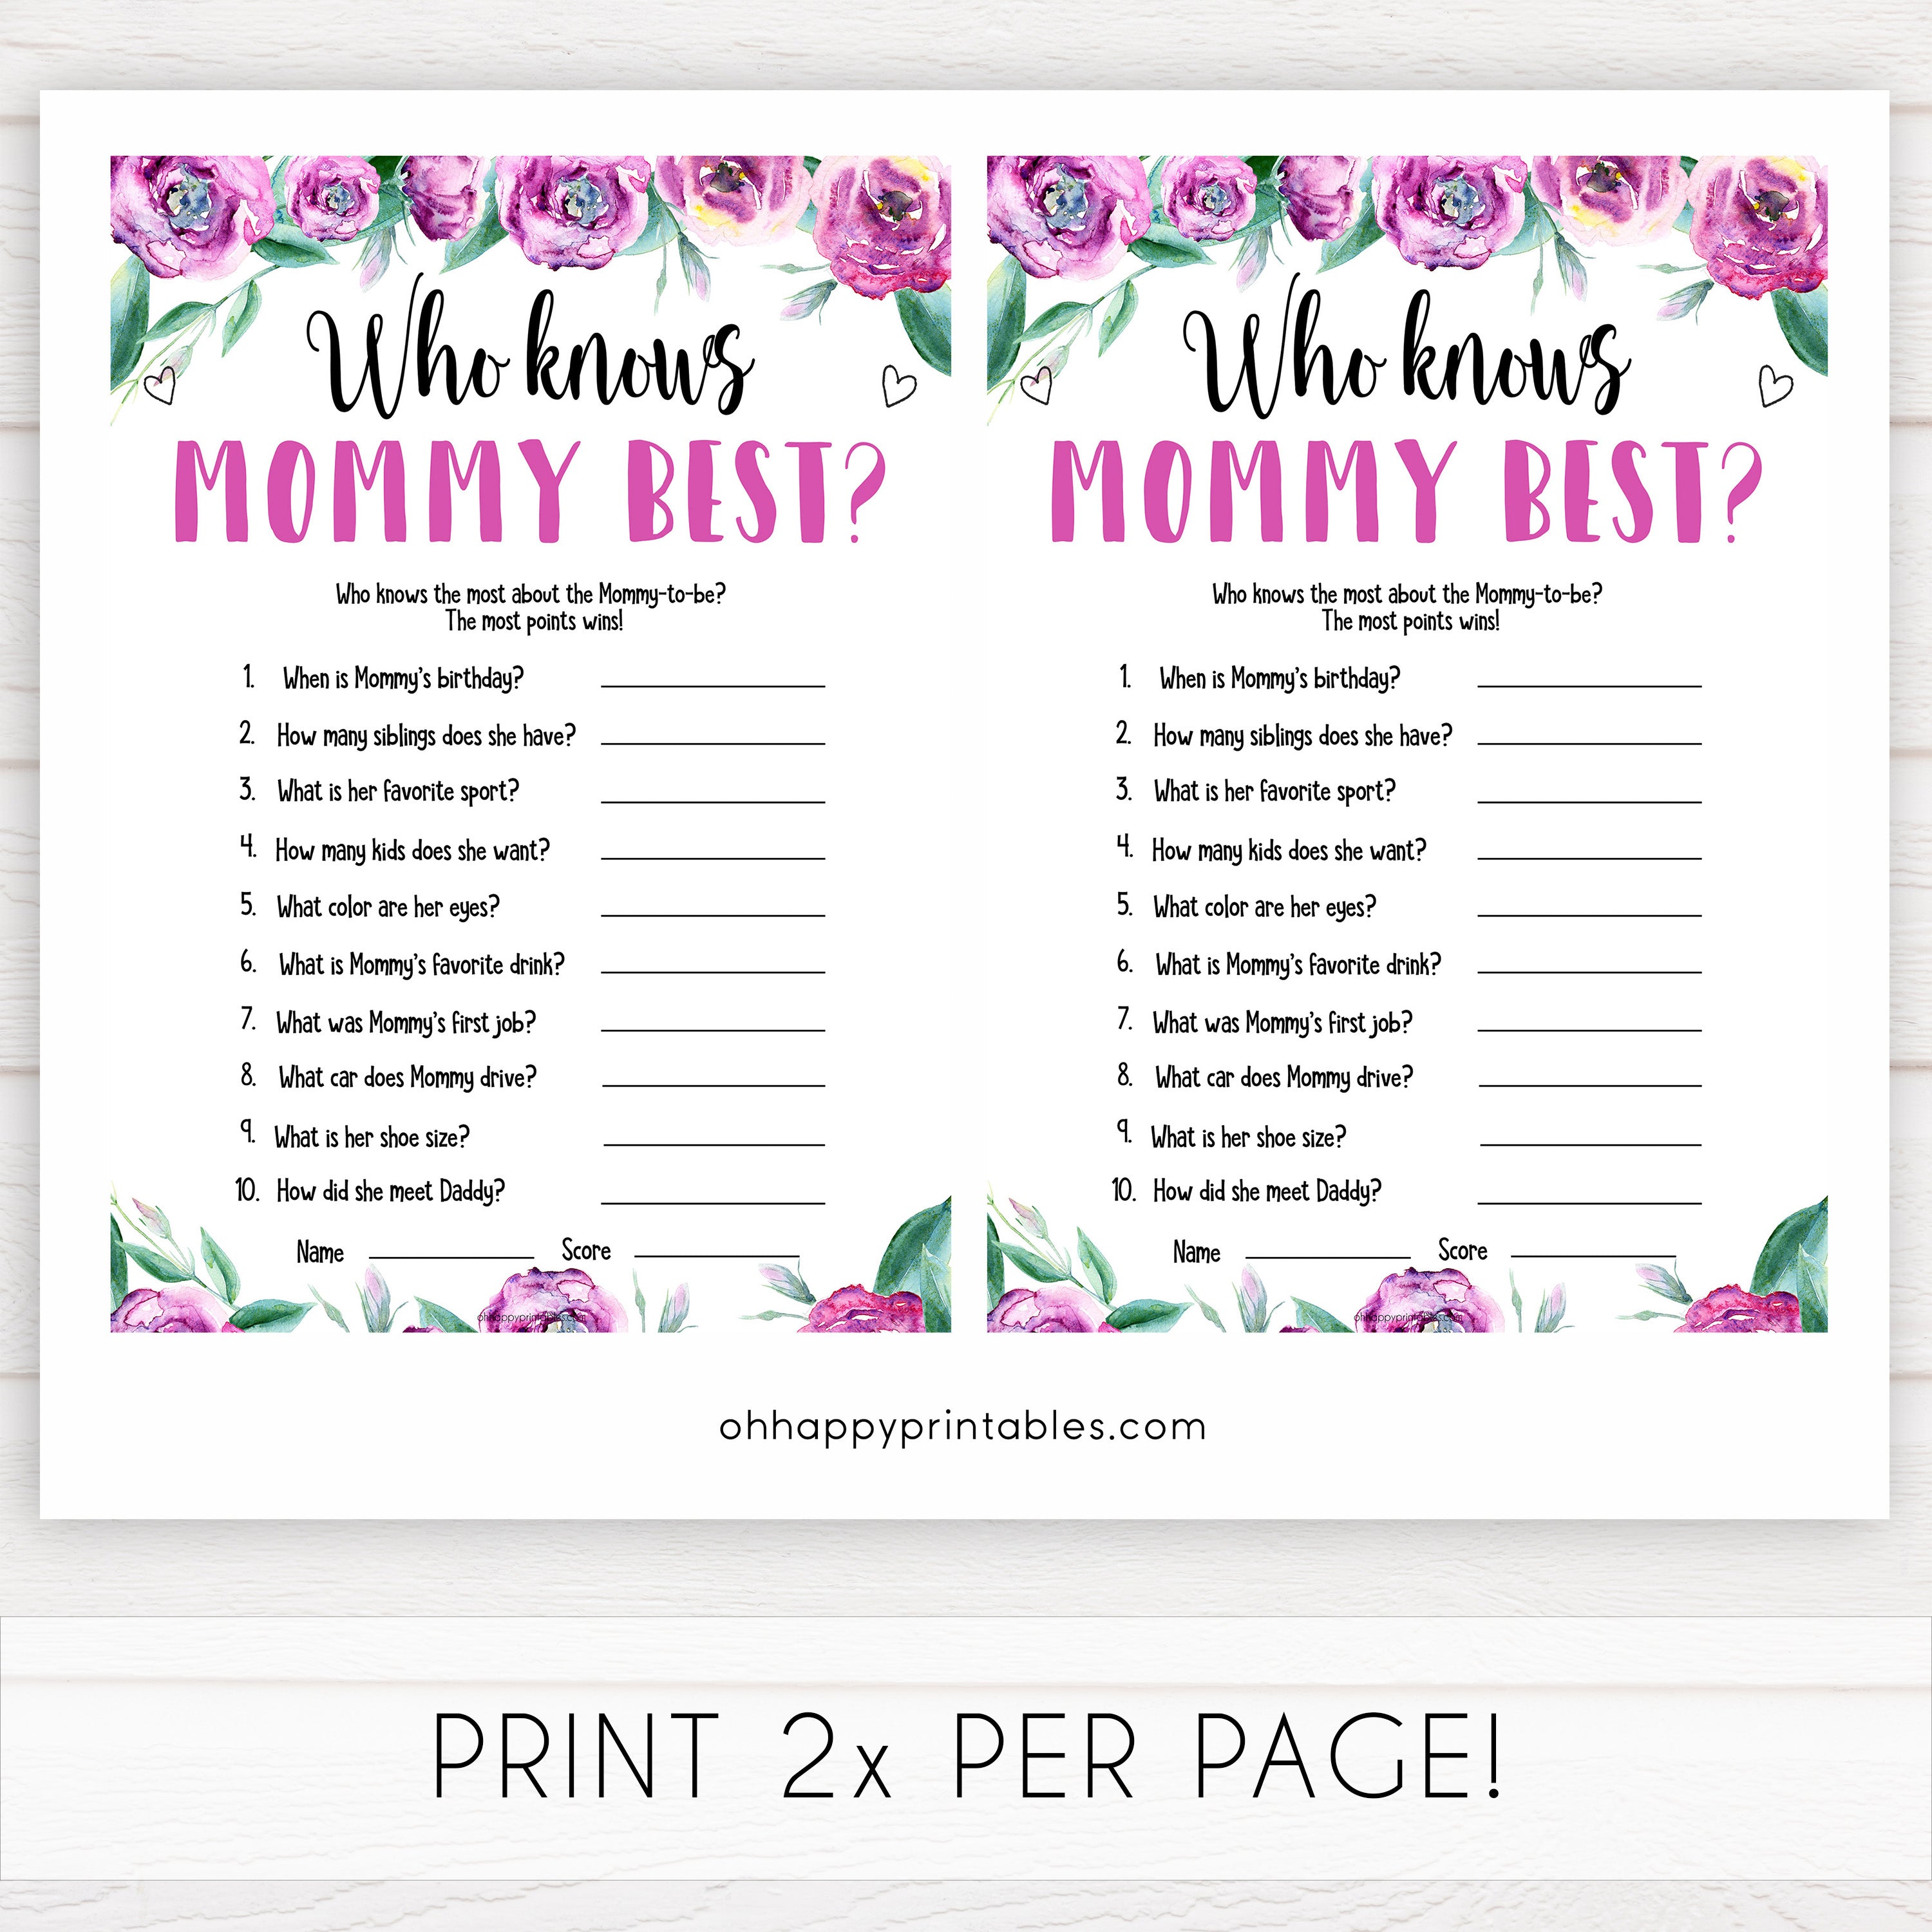 Purple peonies who knows mommy best baby shower games, printable baby shower games, fun baby shower games, baby shower games, popular baby shower games, floral baby shower games, purple baby shower themes